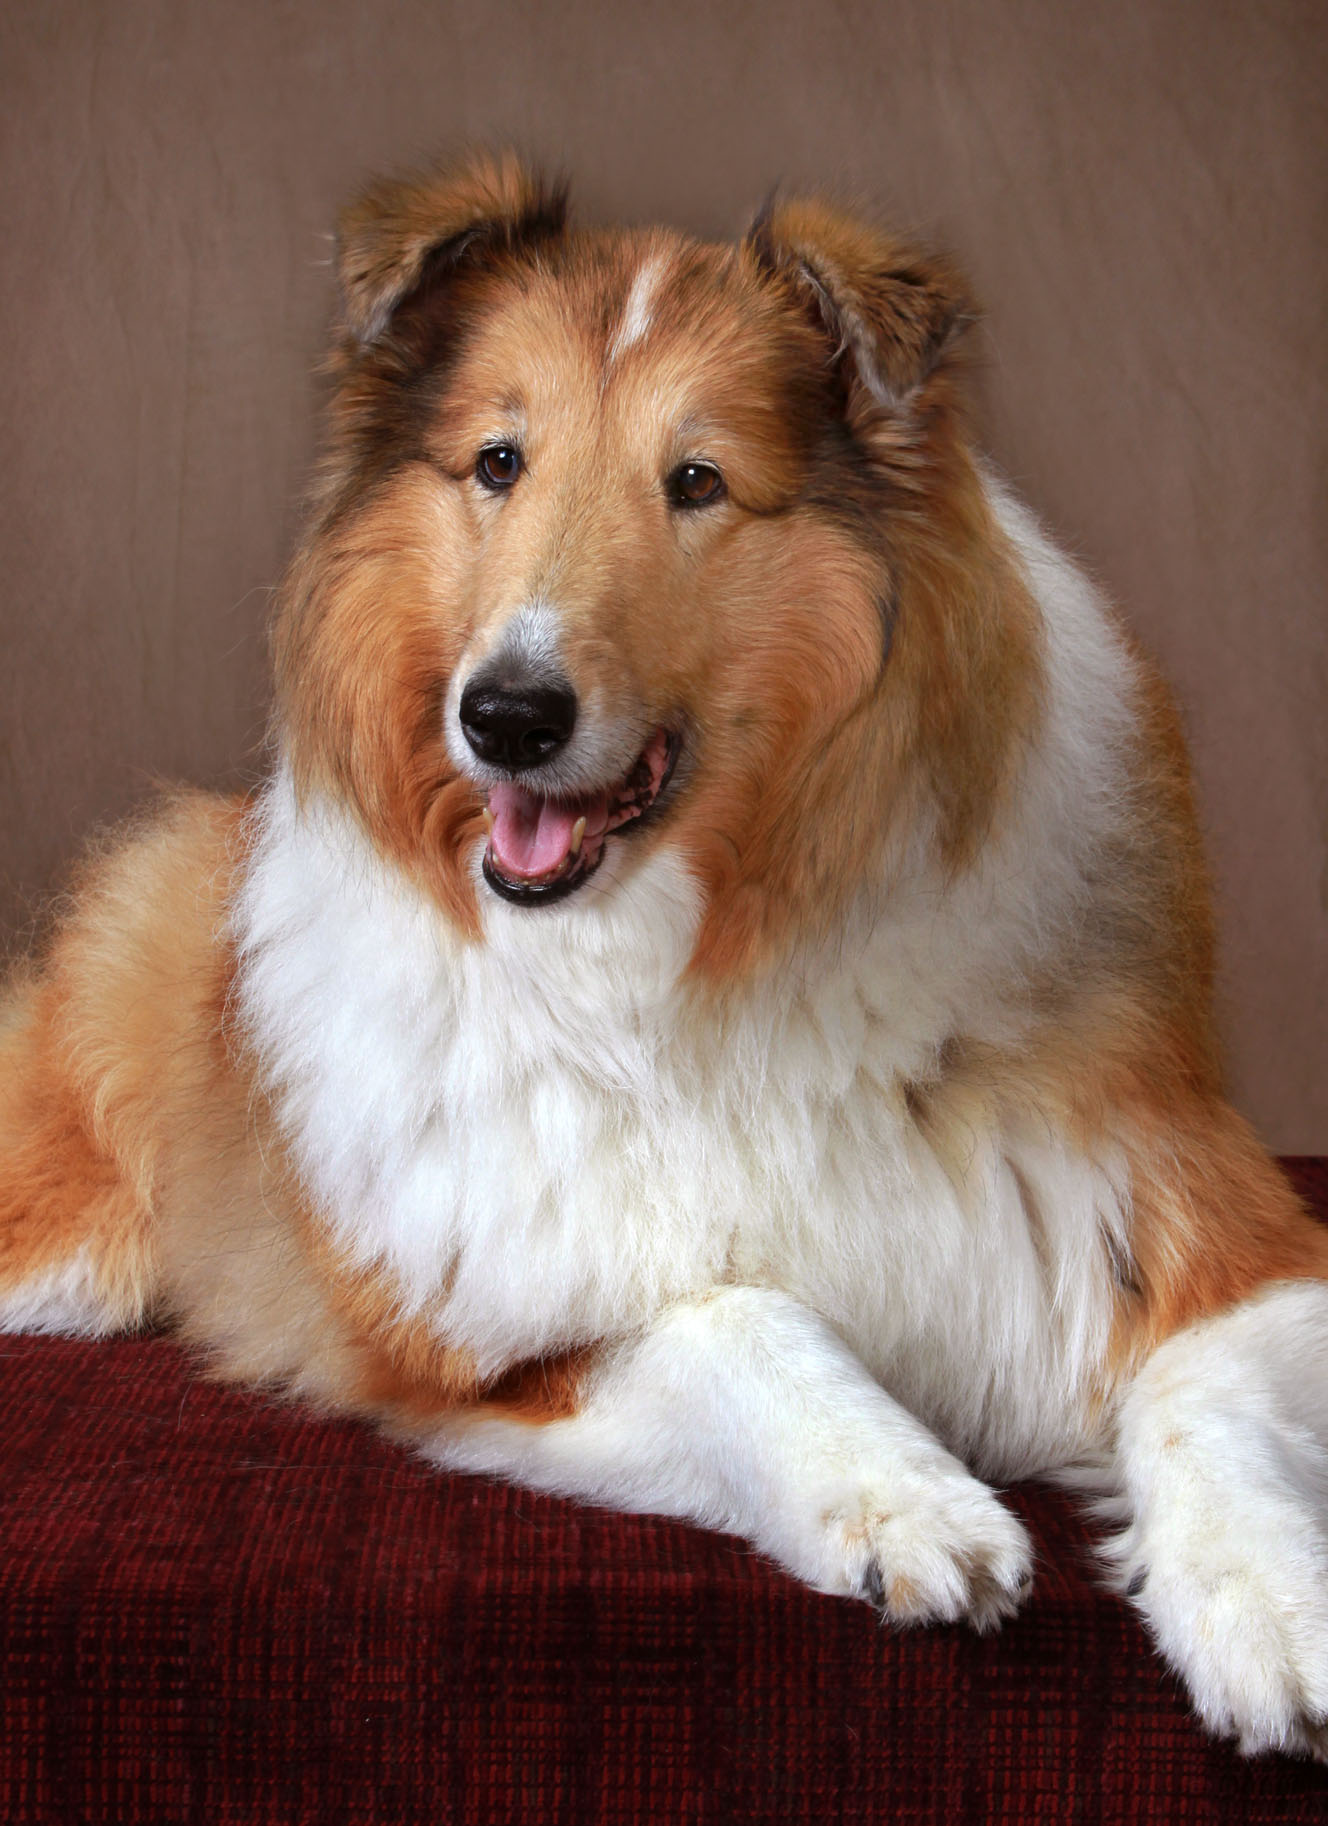 Sable colored collie sits facing the camera on a velvety dark red couch, mouth open with tongue showing a bit.